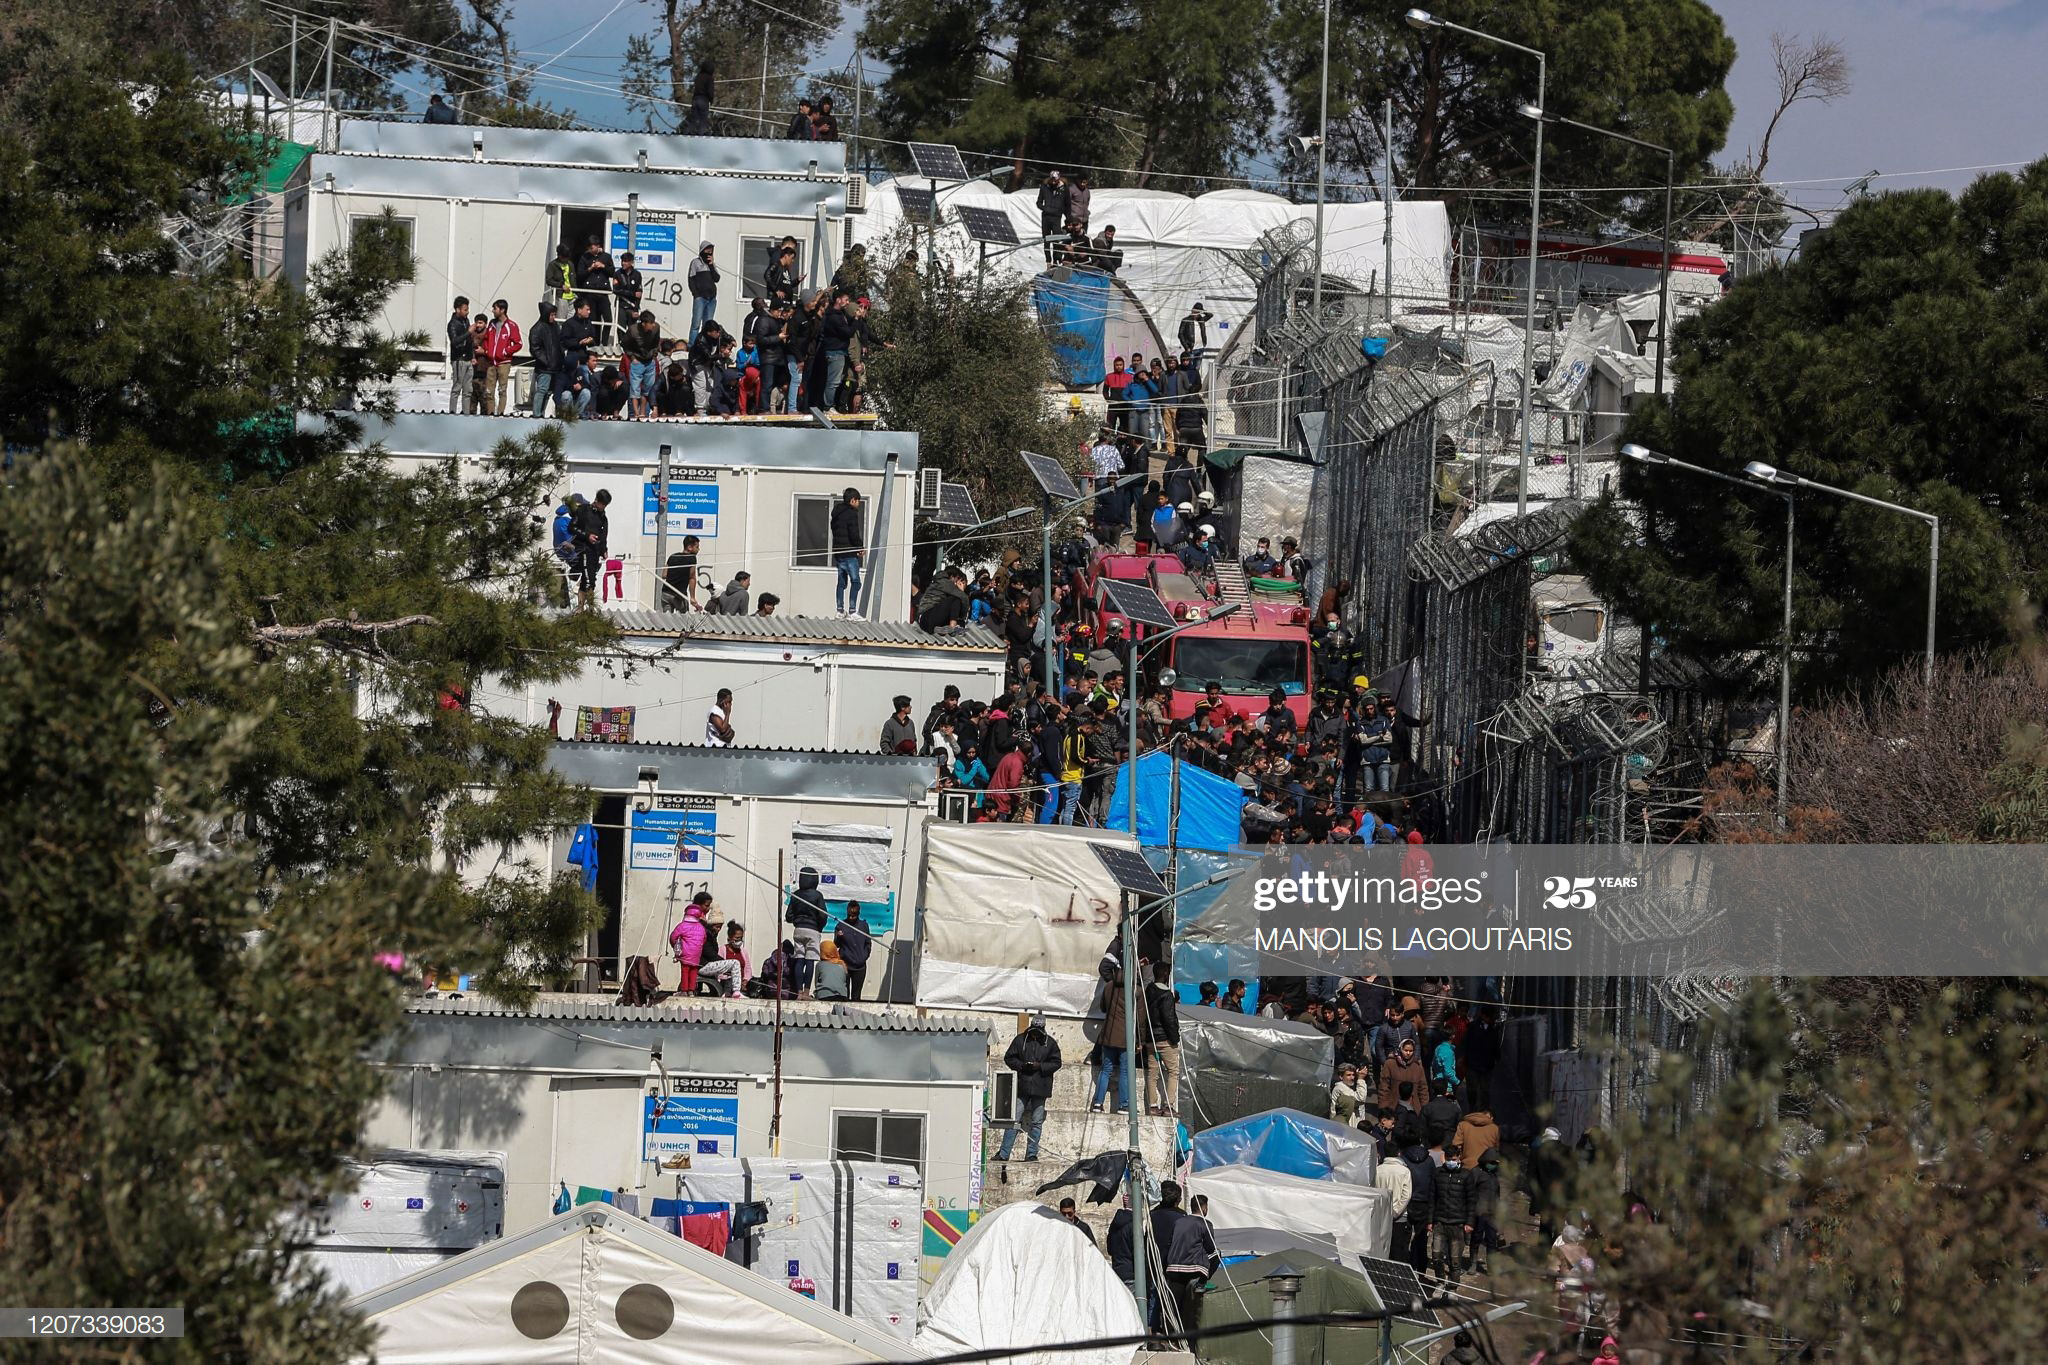 Press Release | Greece: Move Asylum Seekers, Migrants to Safety Immediate Hotspot Decongestion Needed to Address COVID-19